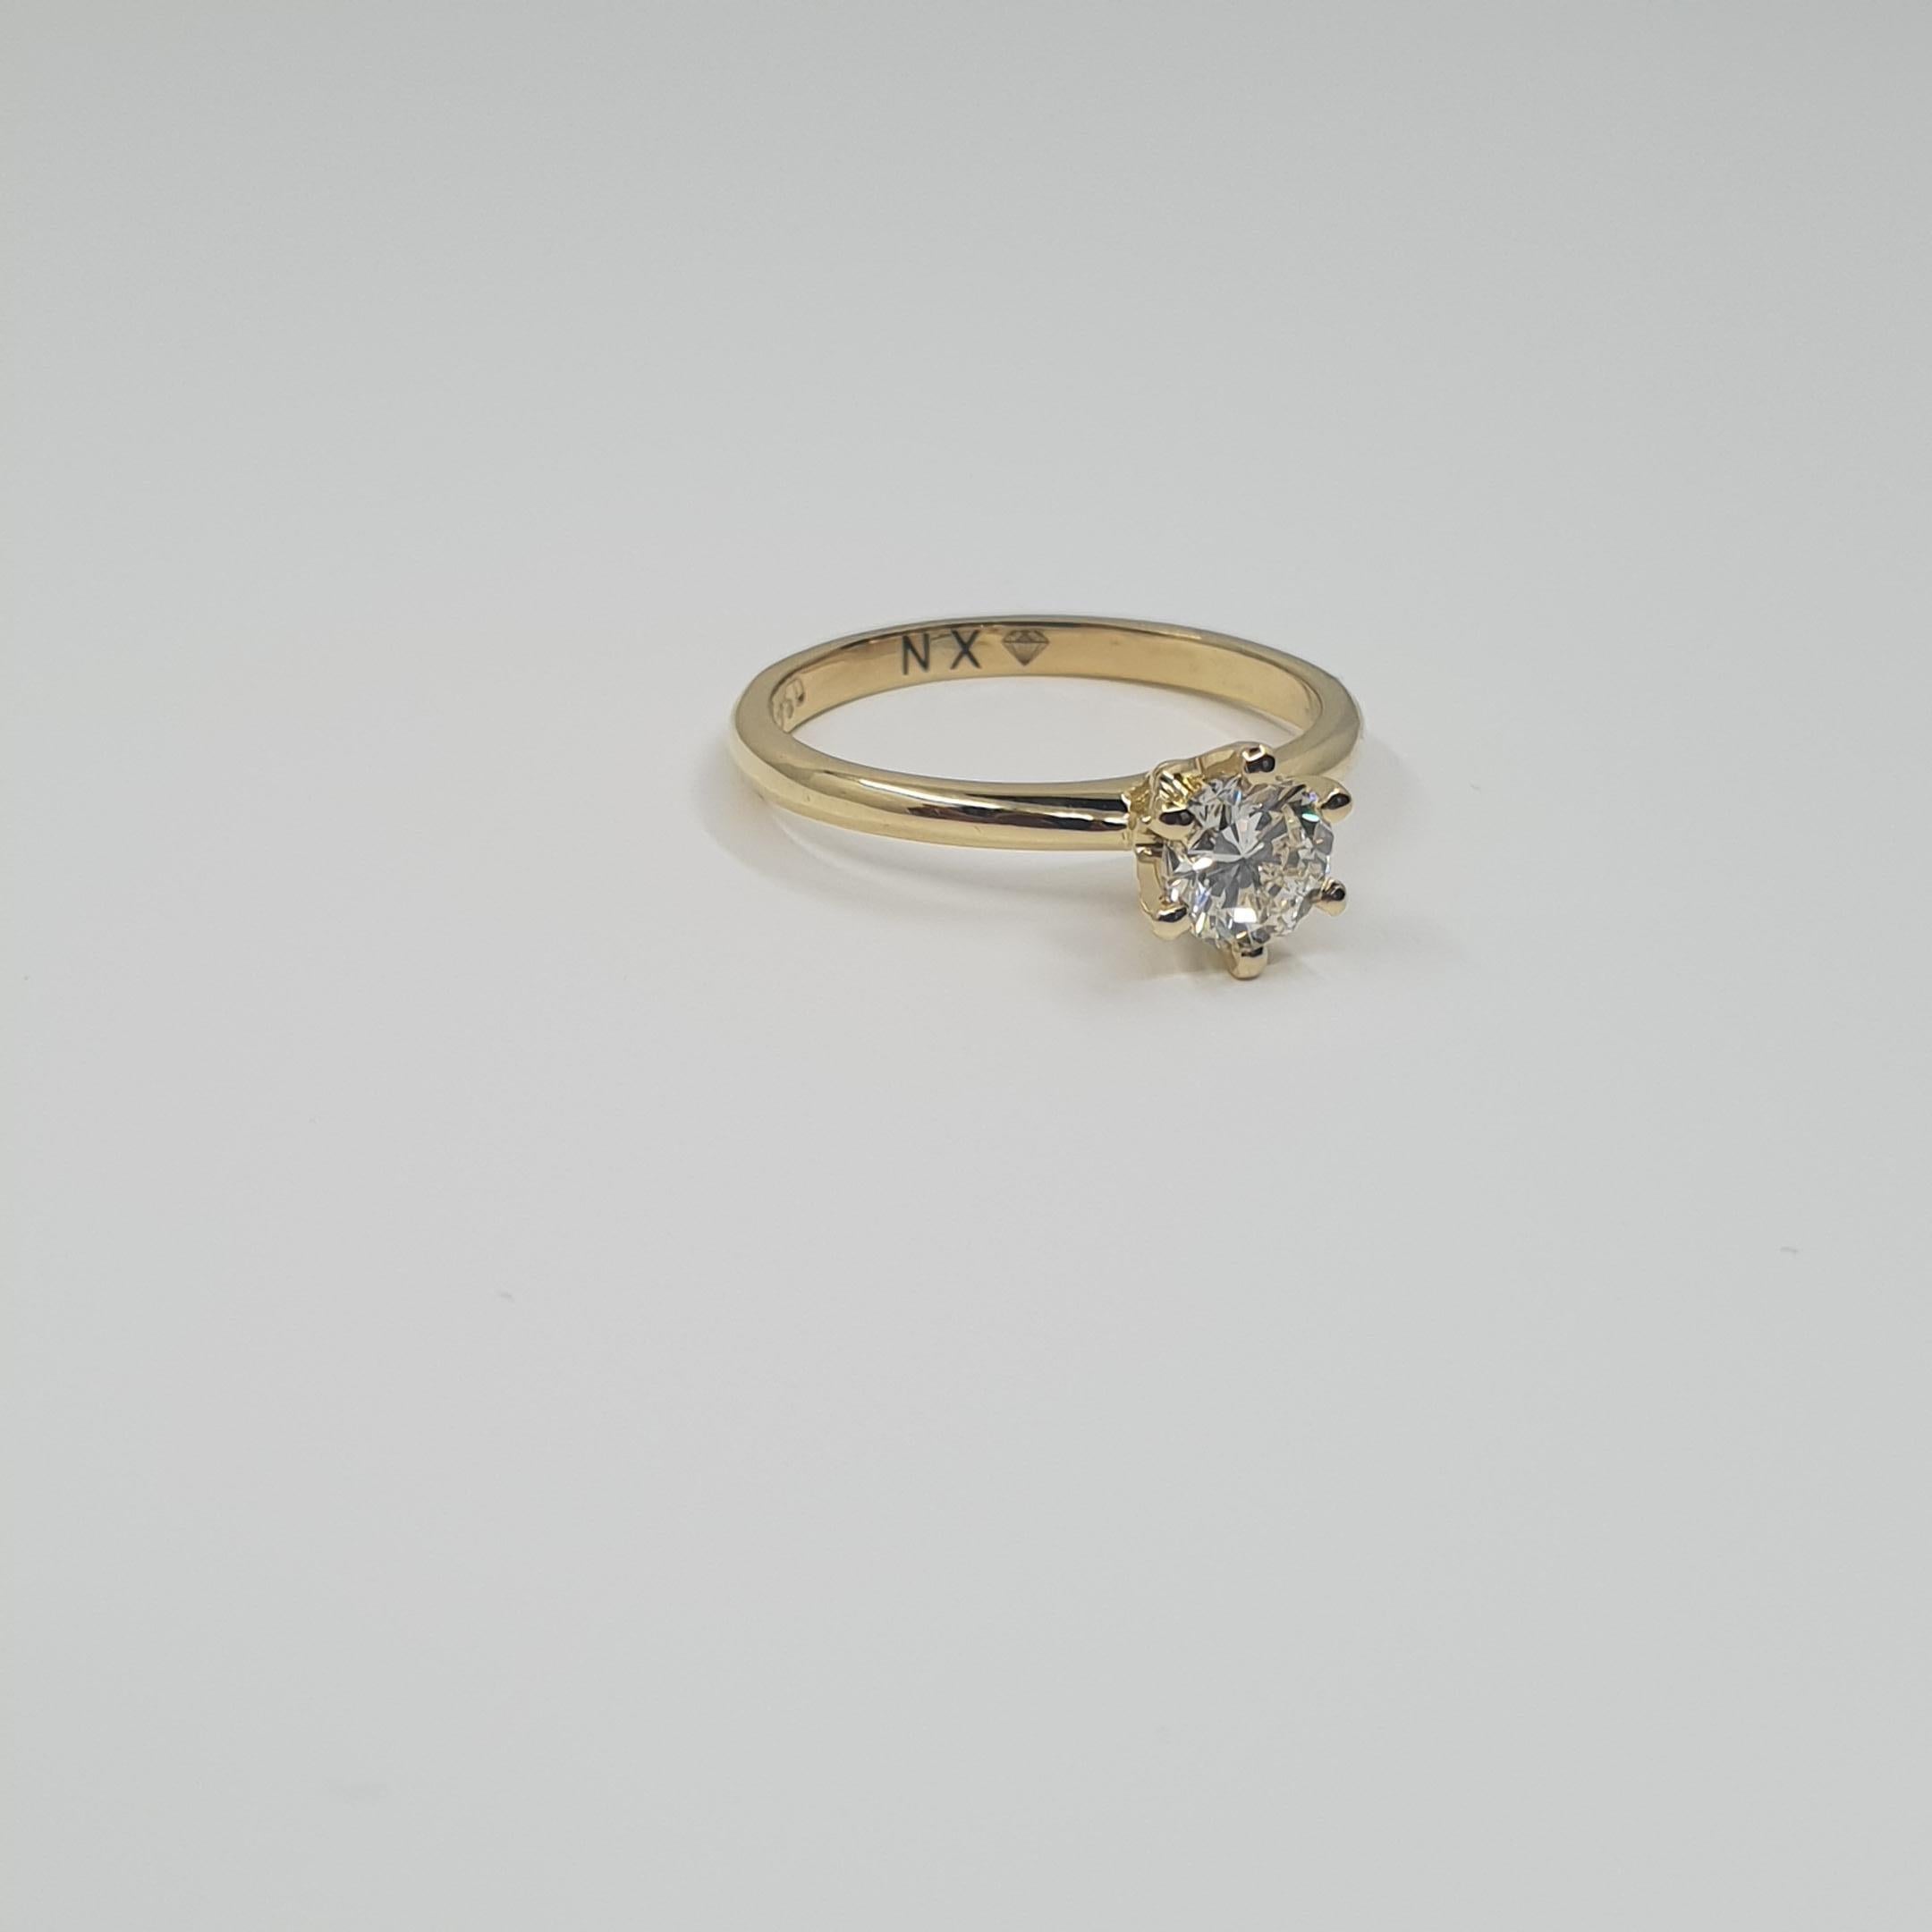 Brilliant Cut GIA Certified Diamond 0.50 H/SI1 Solitaire Ring 750 Gold in 6 Prong Setting For Sale